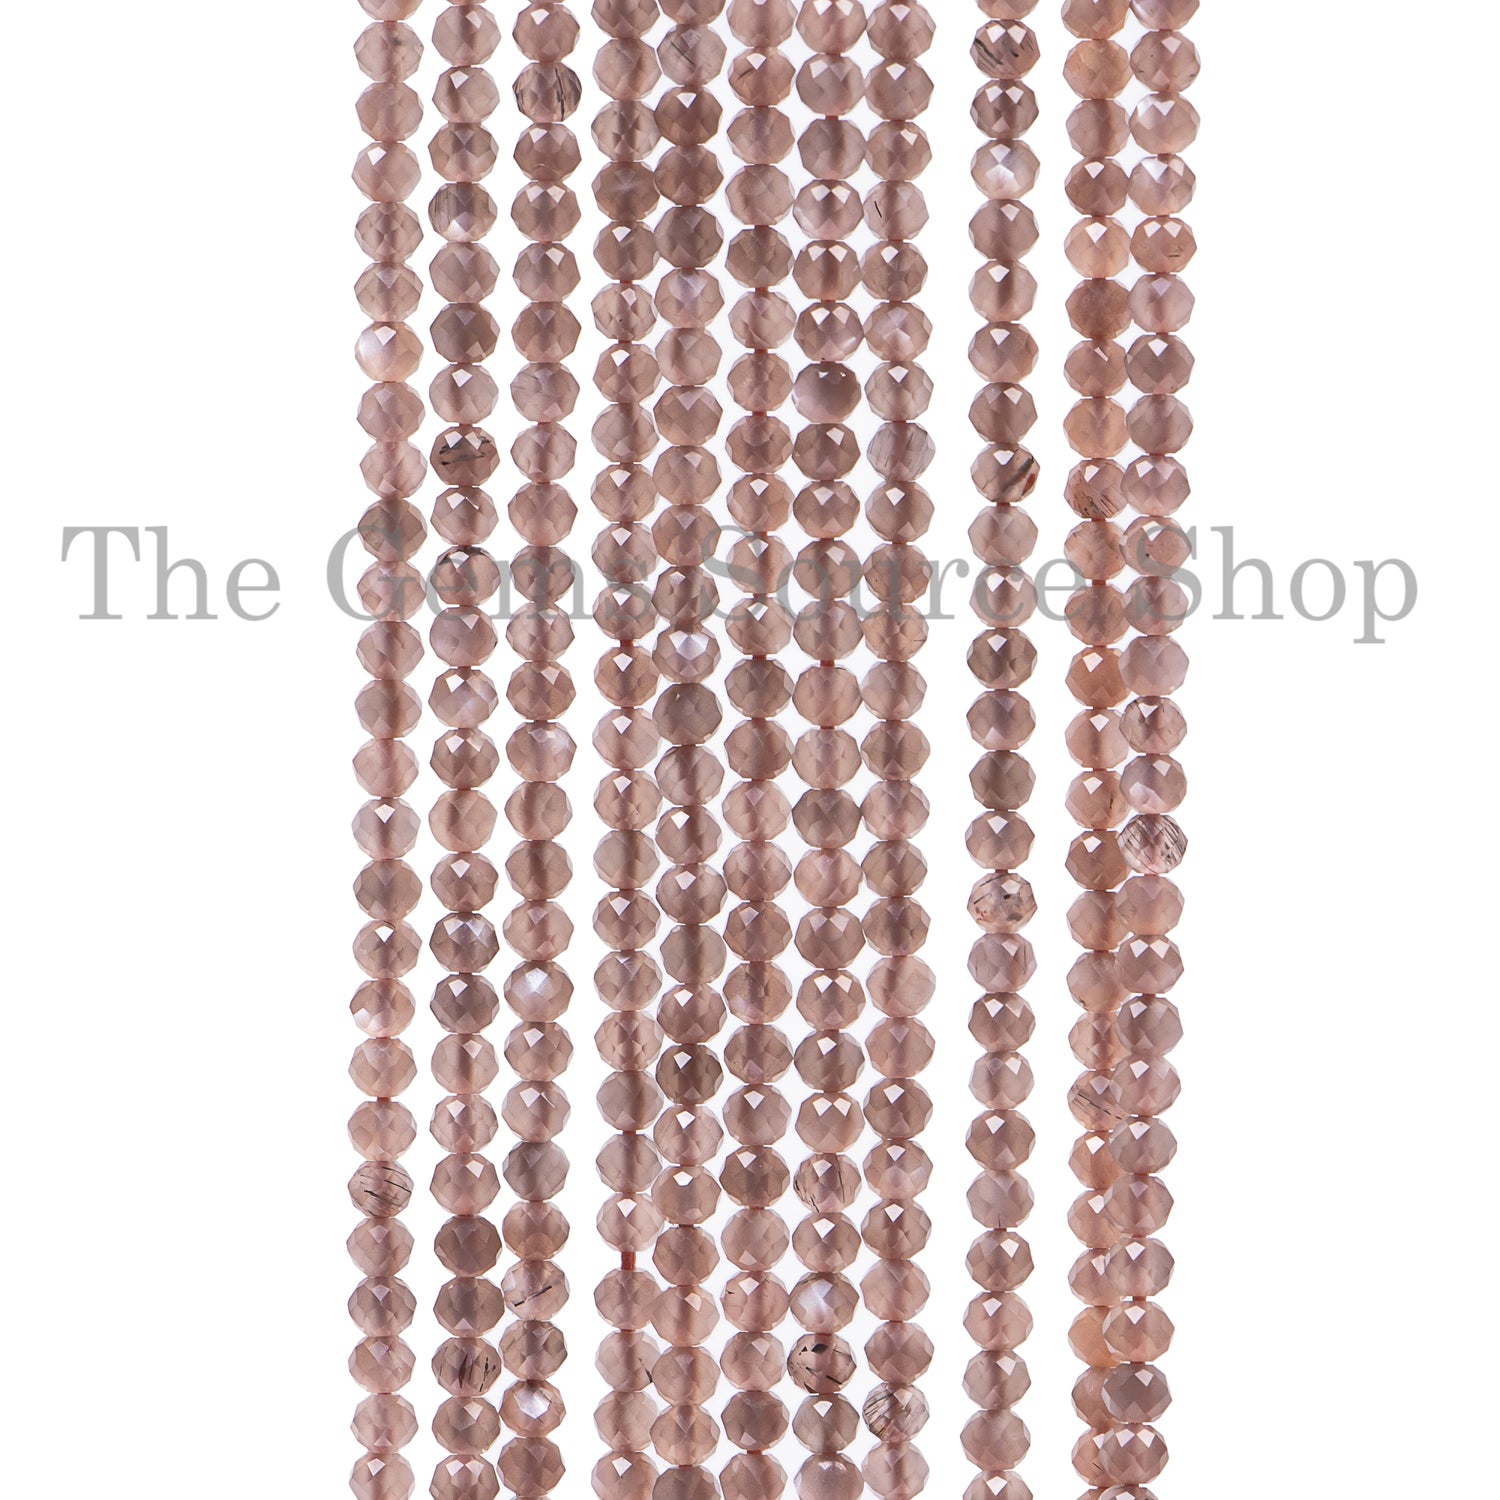 Chocolate Moonstone Beads, Moonstone Faceted Beads, Moonstone Rondelle Shape Beads